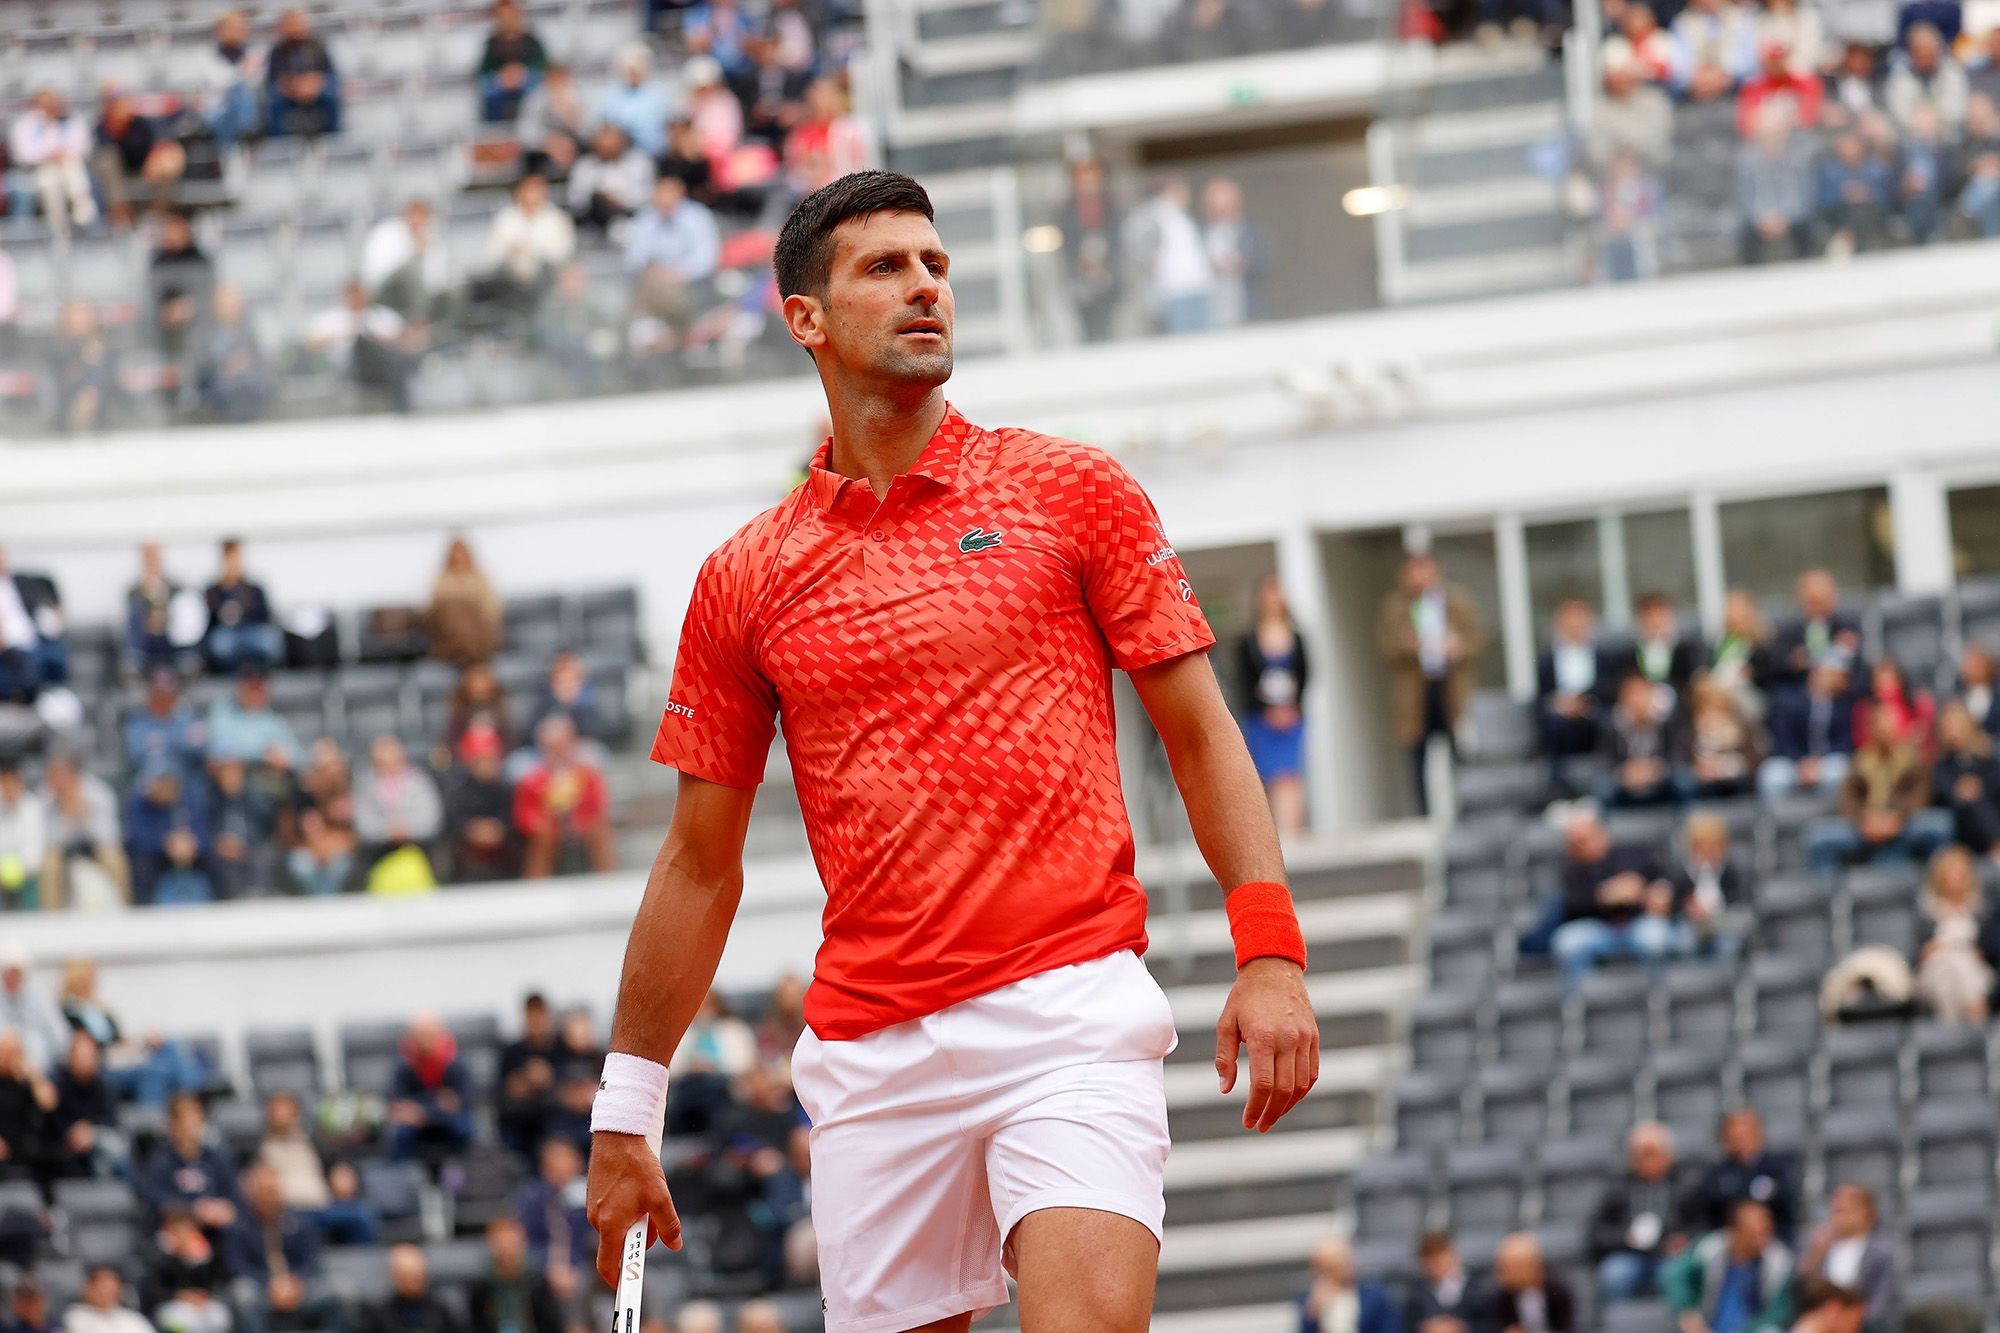 Novak Djokovic wasn't happy after Cameron Norrie hit the back of